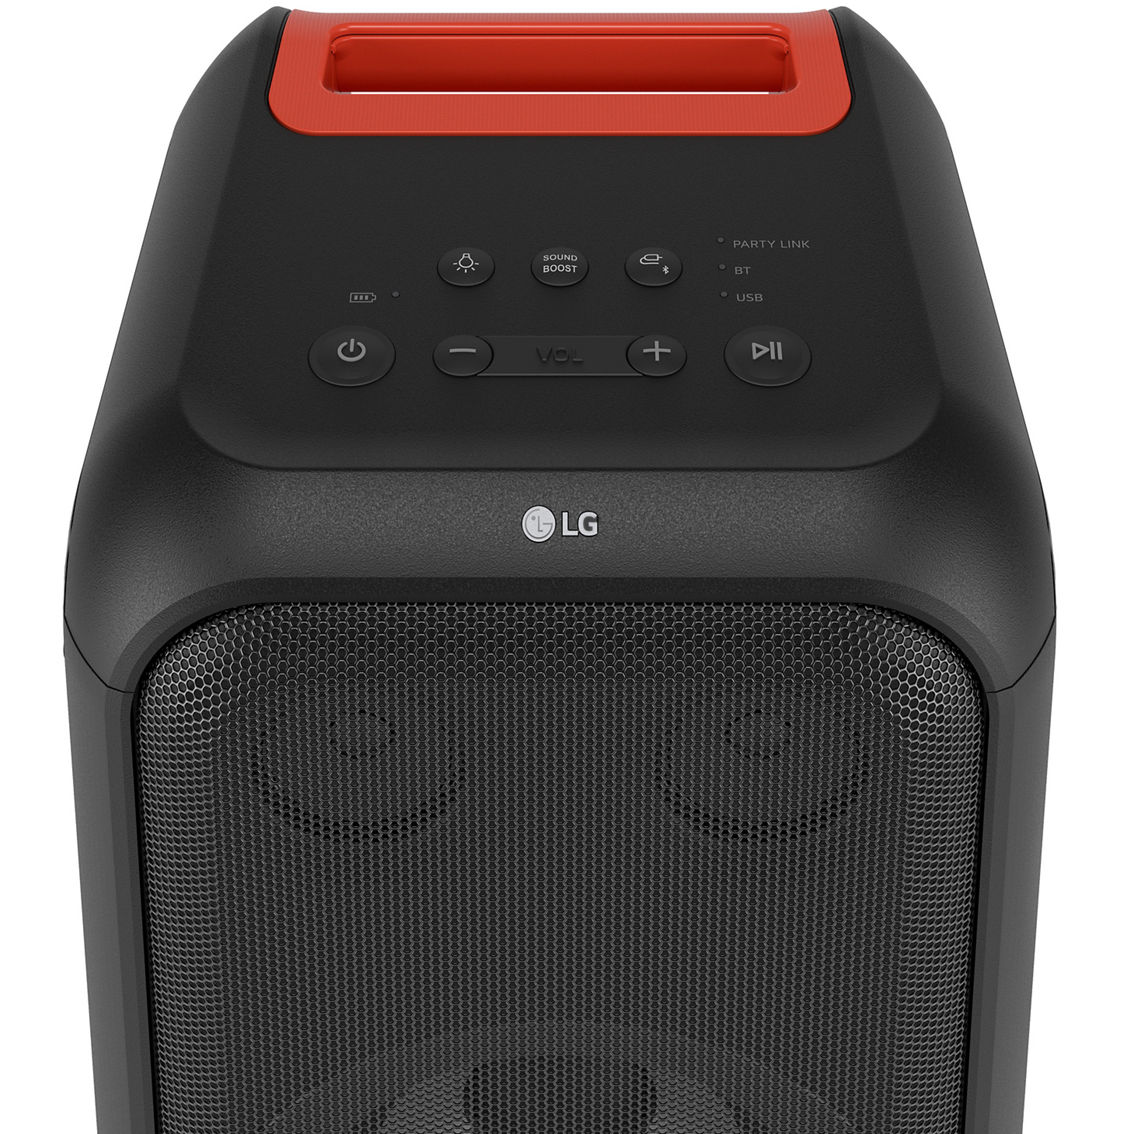 Party Xl5s Electronics | 200w The Xboom | Exchange 2.1 | Shop Speakers Multi-color Speaker Lg Lighting With Portable Channel